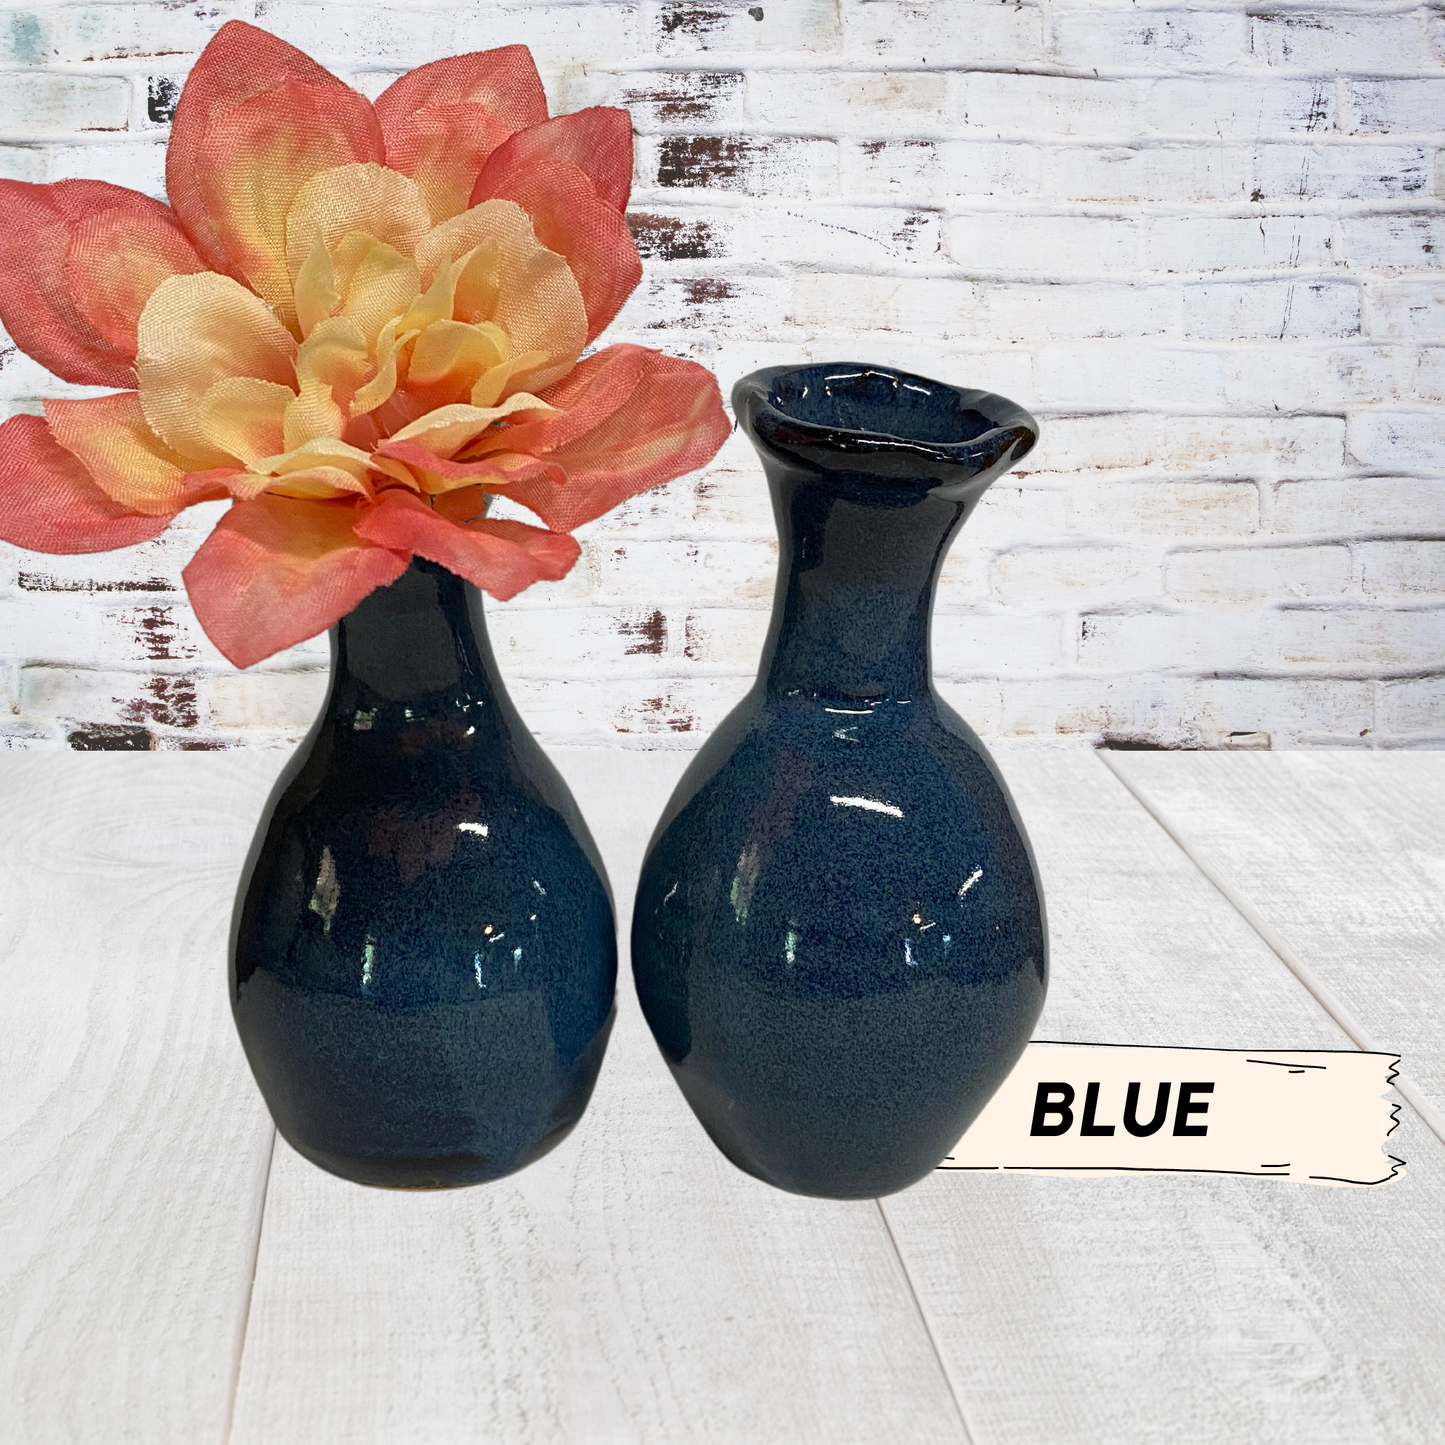 Small vase for flowers with tilted neck. weed pots, tiny vase for small blooms. Pottery handmade